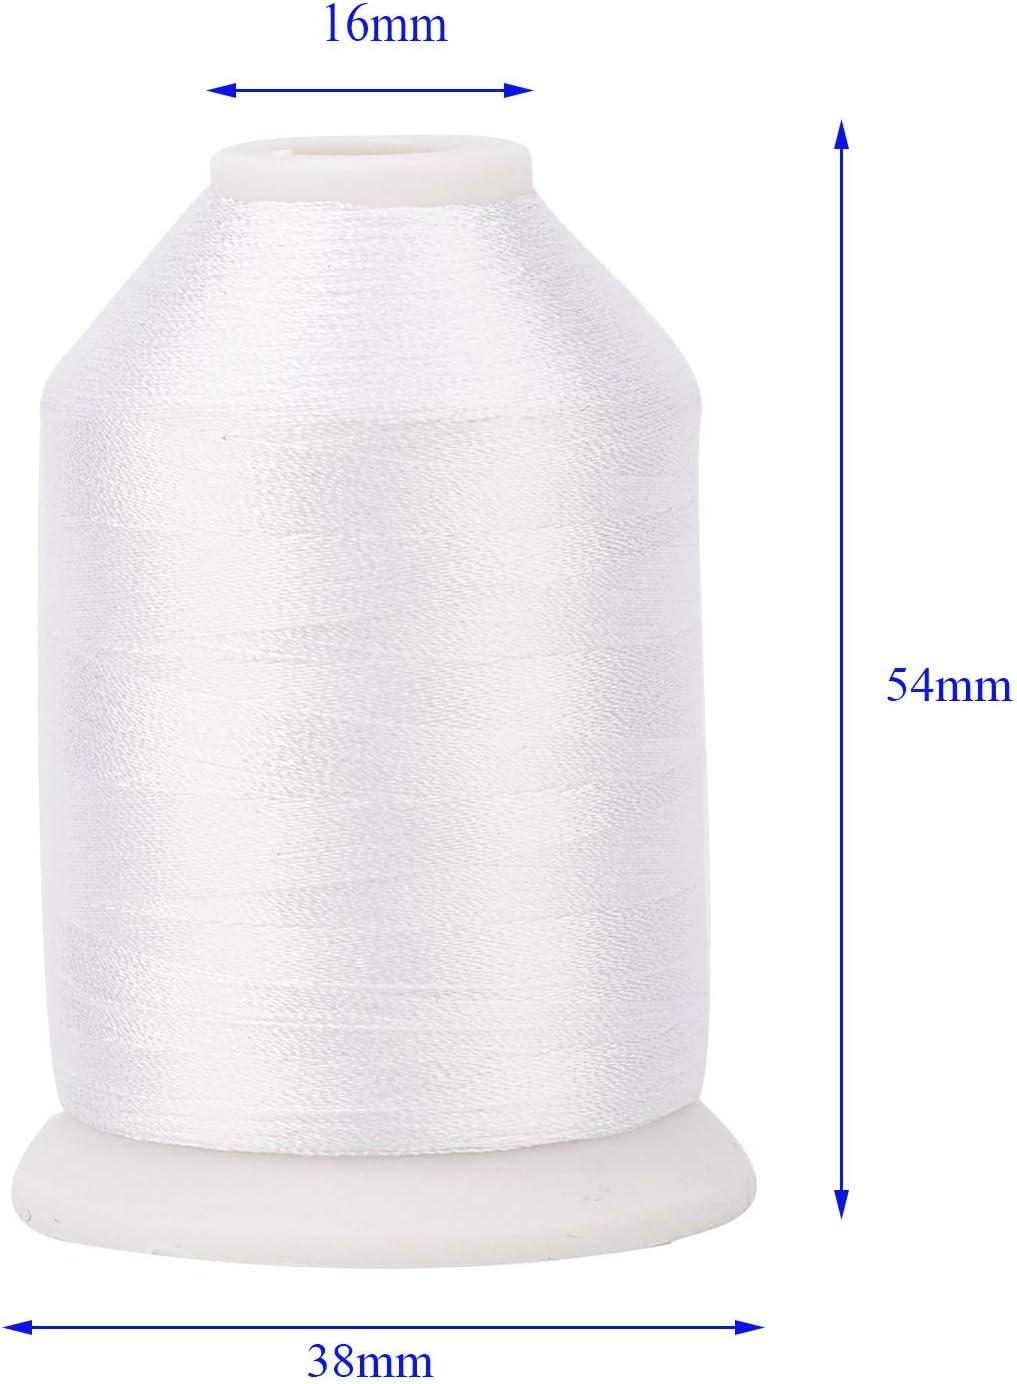 Simthreads 2 Bobbin Thread for Sewing and Embroidery Machine 1 Black and 1 White 5500 Yards Each - 60wt Polyester Bobbin Fill